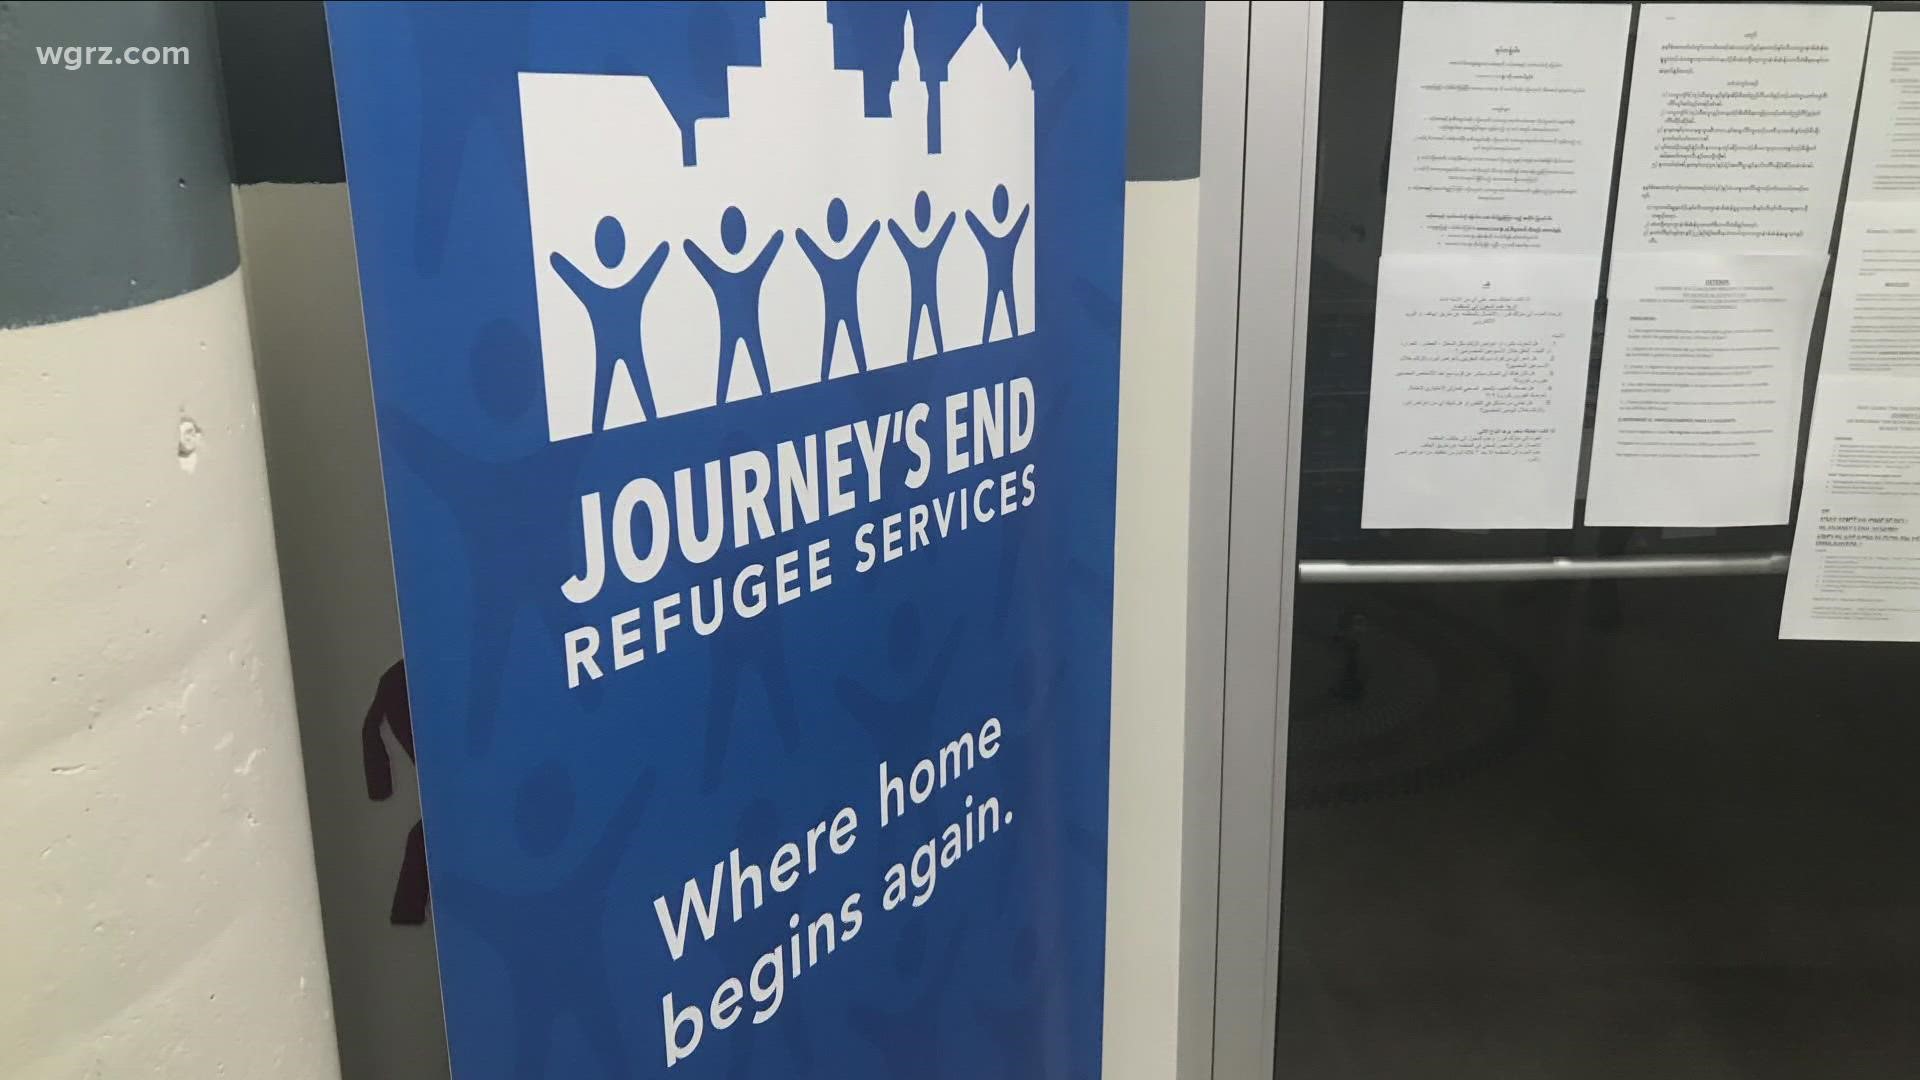 Over 16,000 refugees have resettled in Buffalo since 2002 and that number is expected to keep growing.